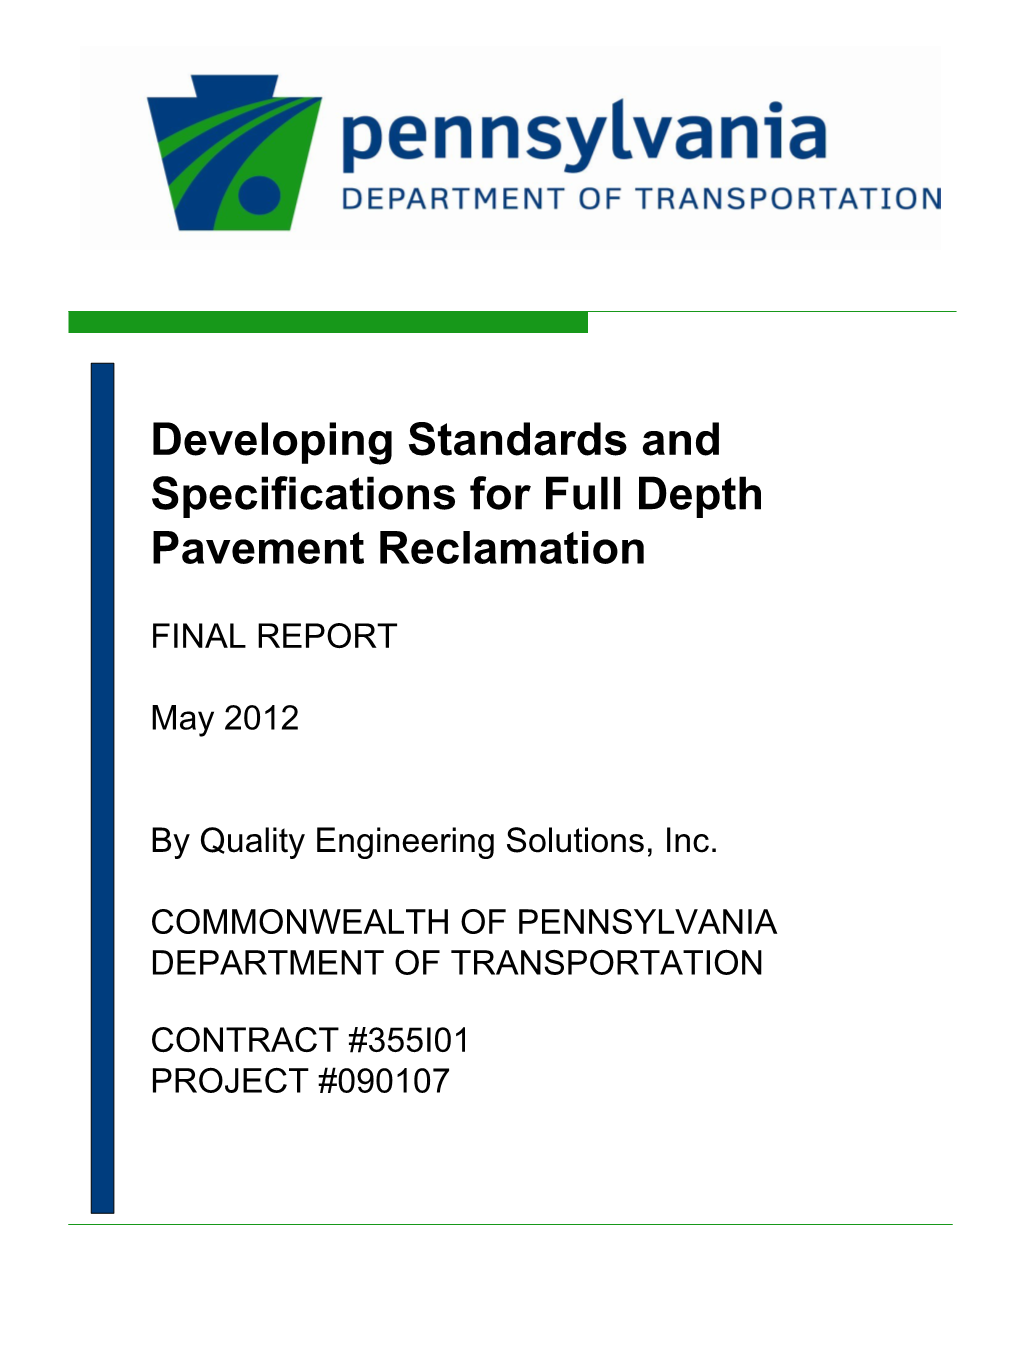 Developing Standards and Specifications for Full Depth Pavement Reclamation